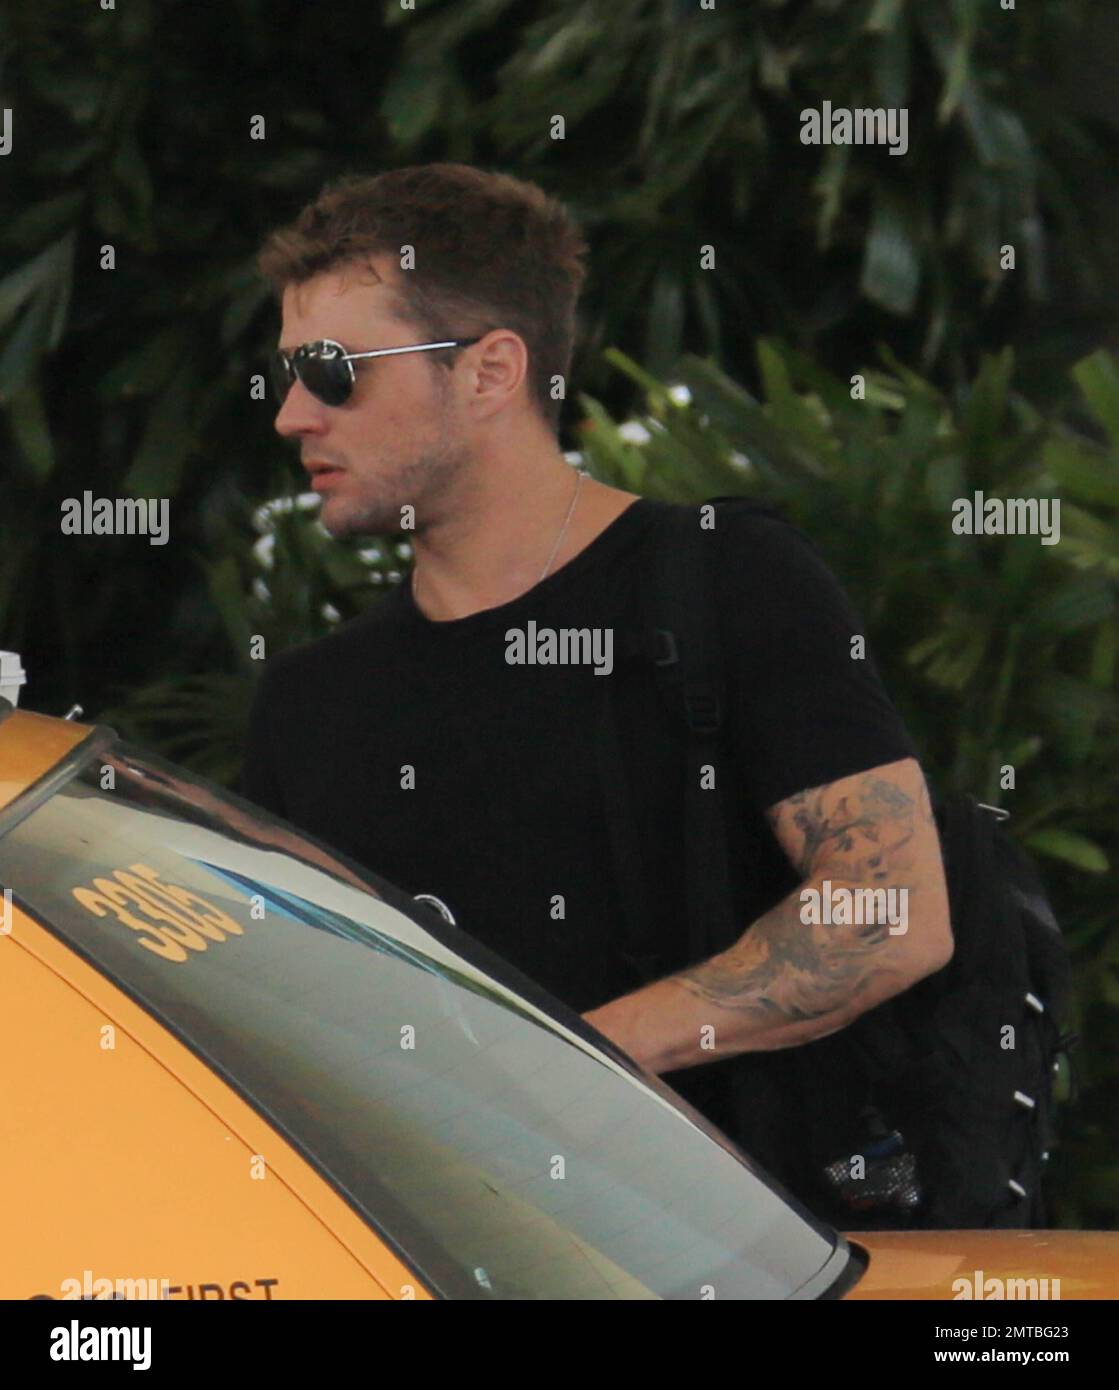 Ryan Phillippe and Paulina Slagter get in a taxi as they head out on the town for an afternoon in South Beach. Miami Beach, FL. 13th June 2014. Stock Photo